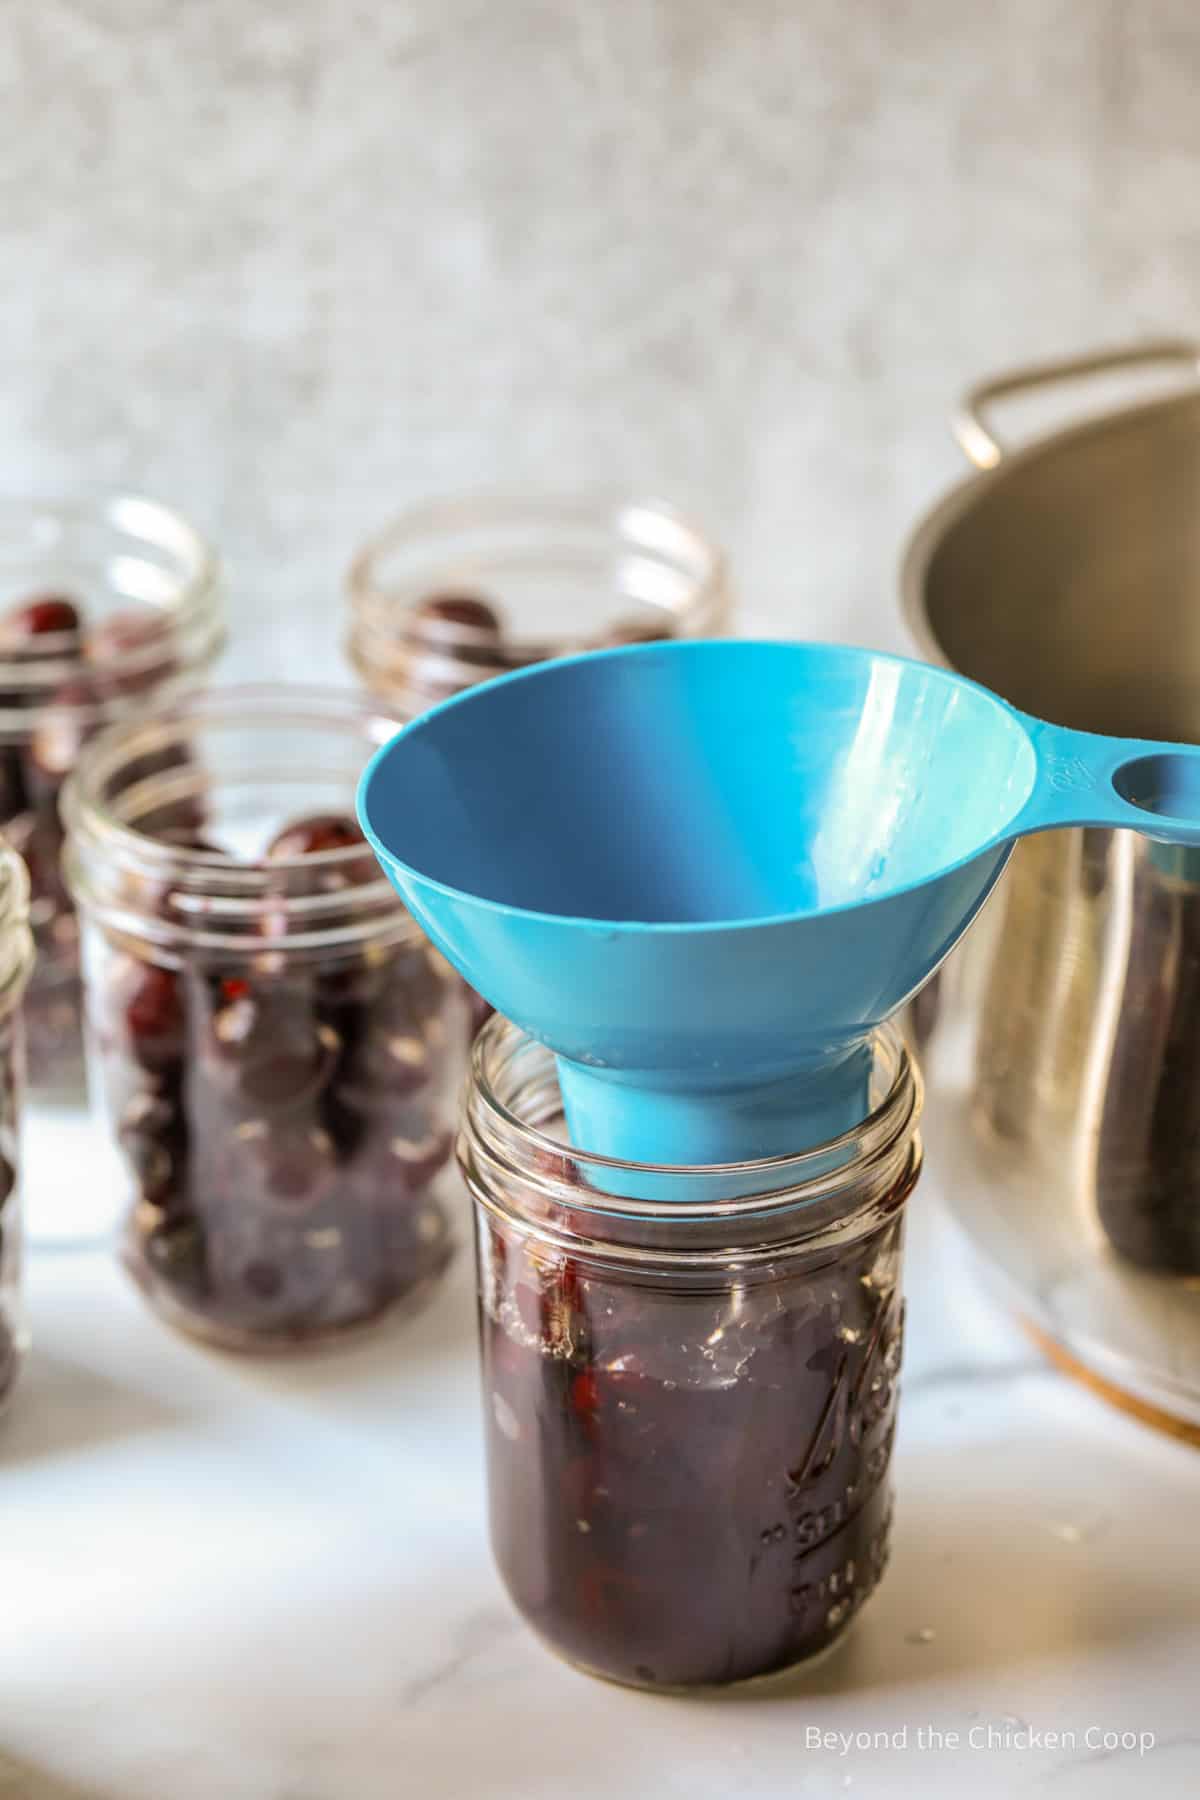 Adding sugar syrup to a jar with cherries using a blue funnel.